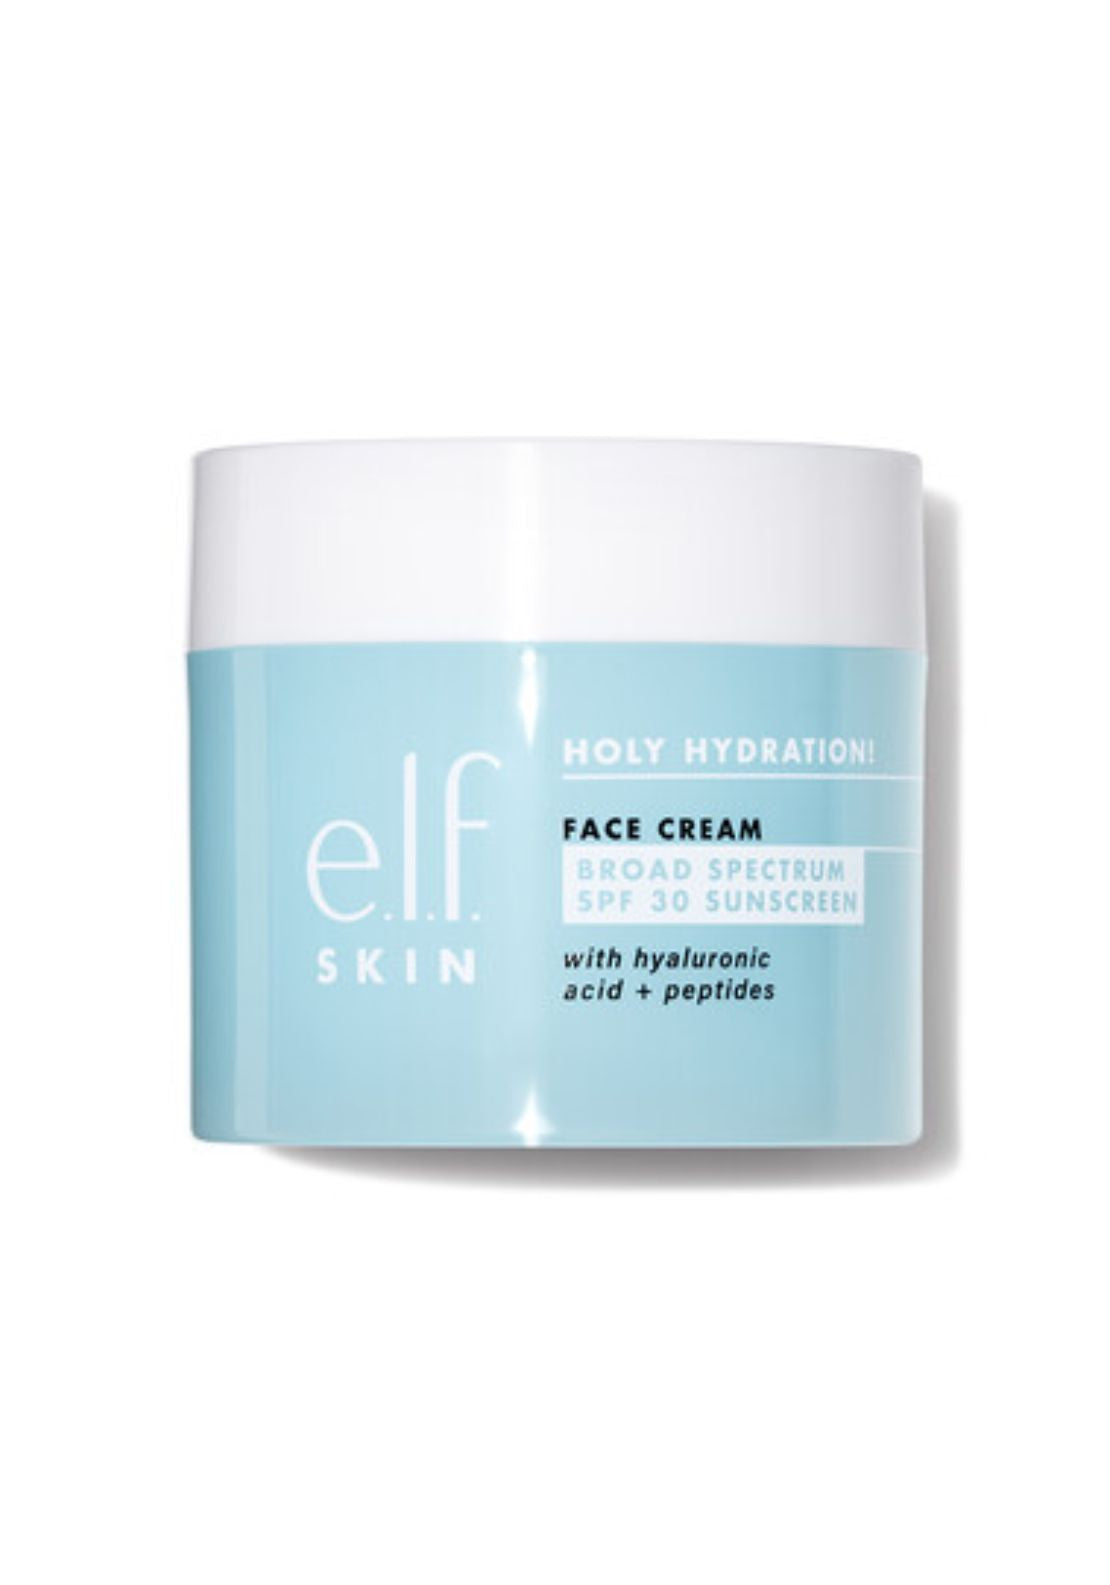 E.l.f Holy Hydration! Face Cream Broad Spectrum SPF 30 Sunscreen 1 Shaws Department Stores